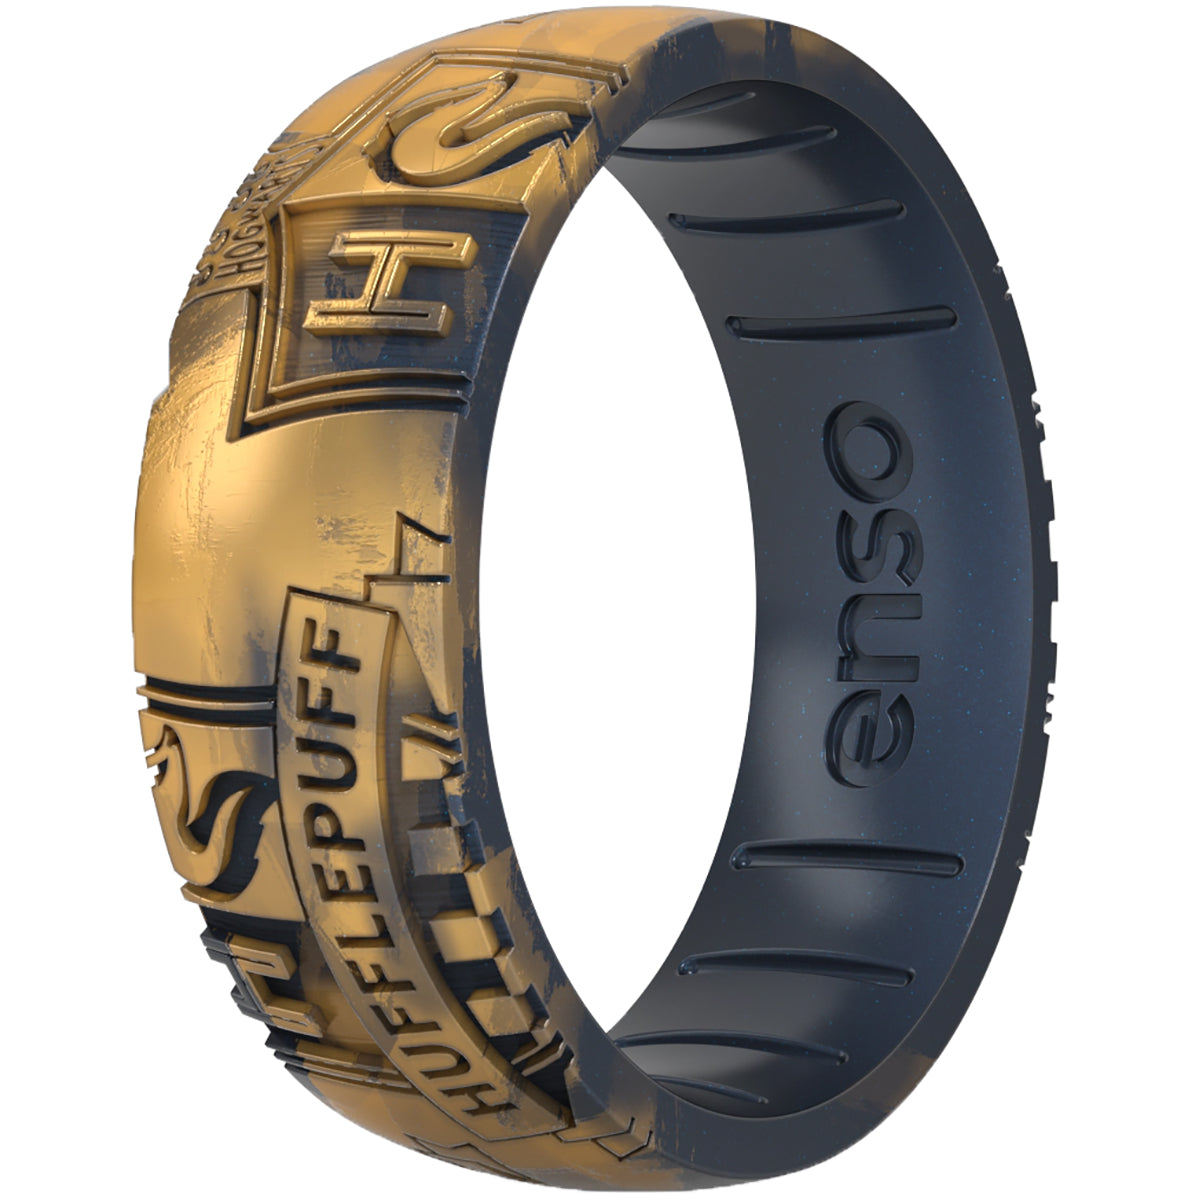 Enso Rings Harry Potter Collection Classic Silicone Ring Enso Rings